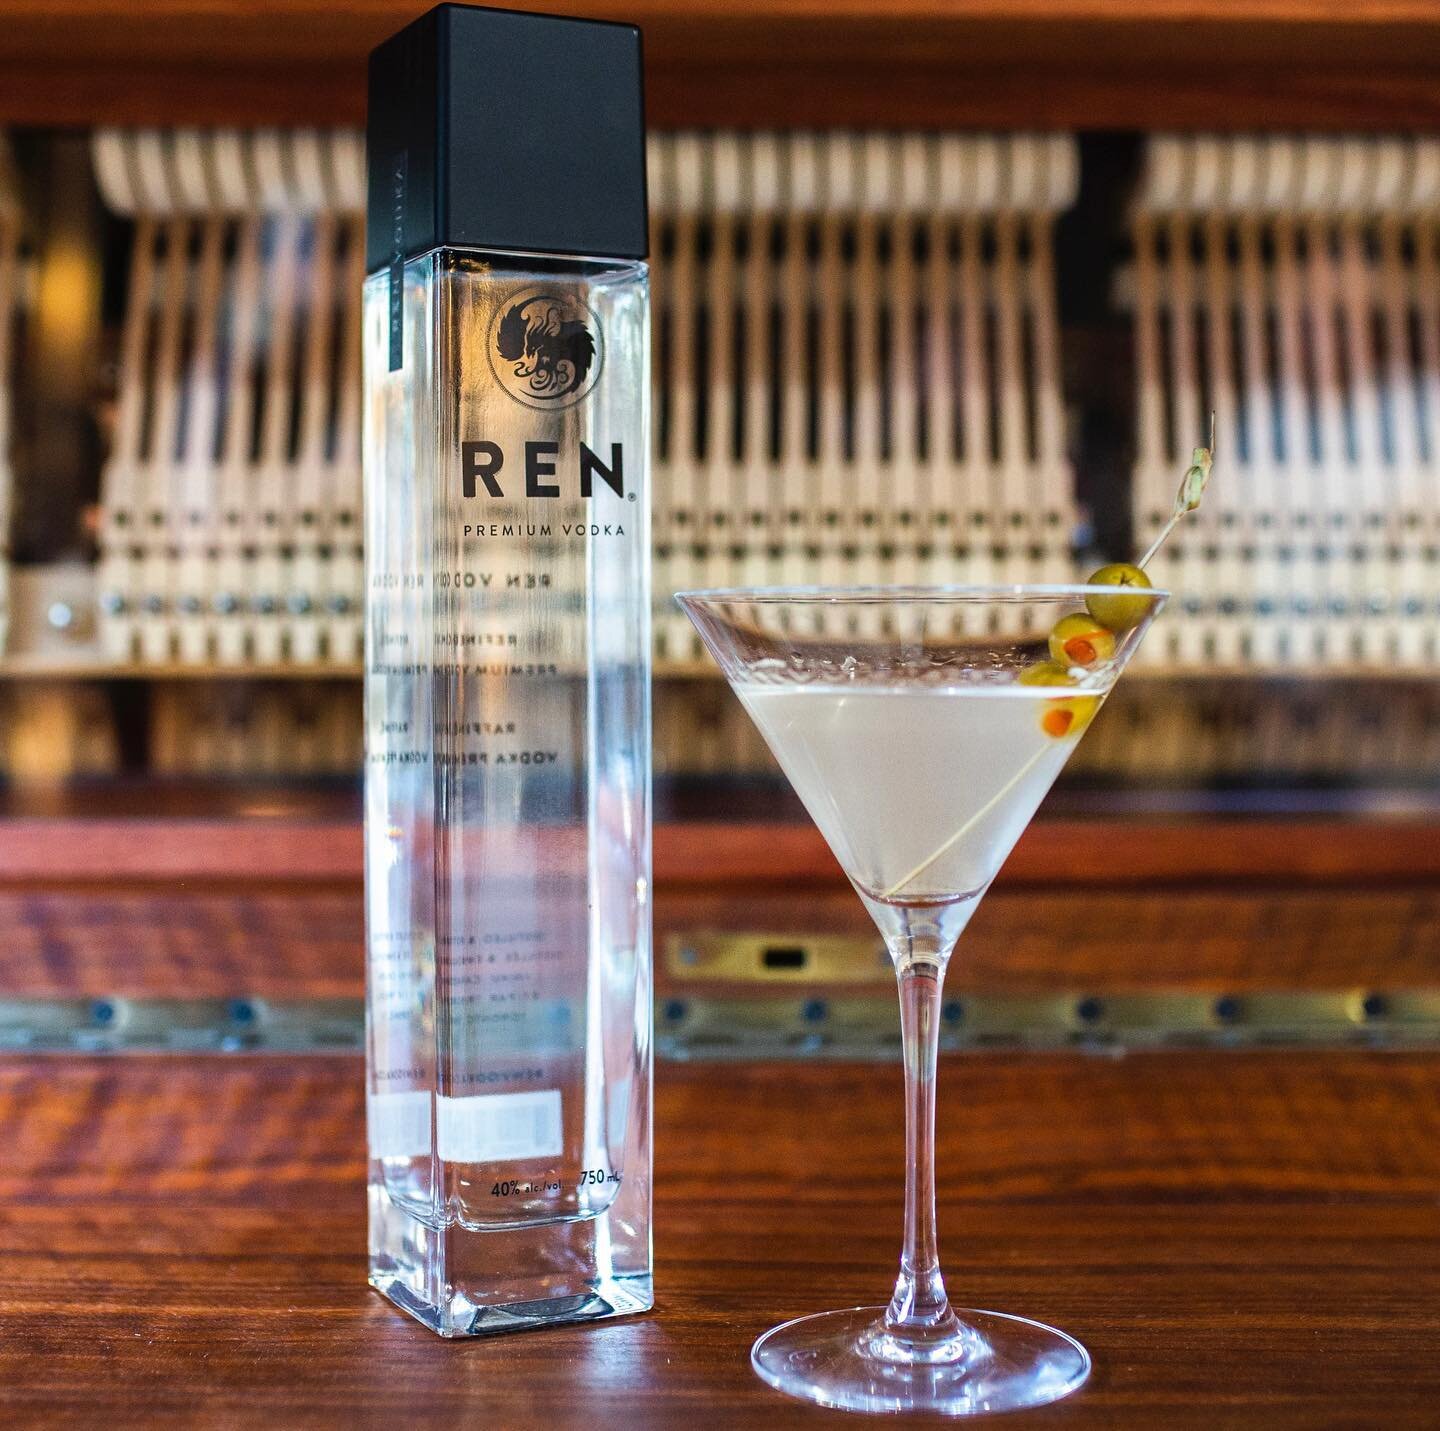 Perfecting a craft takes time, attention to detail and a dedication to quality - something we know all too well, and one of the many reasons we were thrilled to have @renpremiumvodka join us at the launch of Crescendo last week. 

Thank you Renato, N